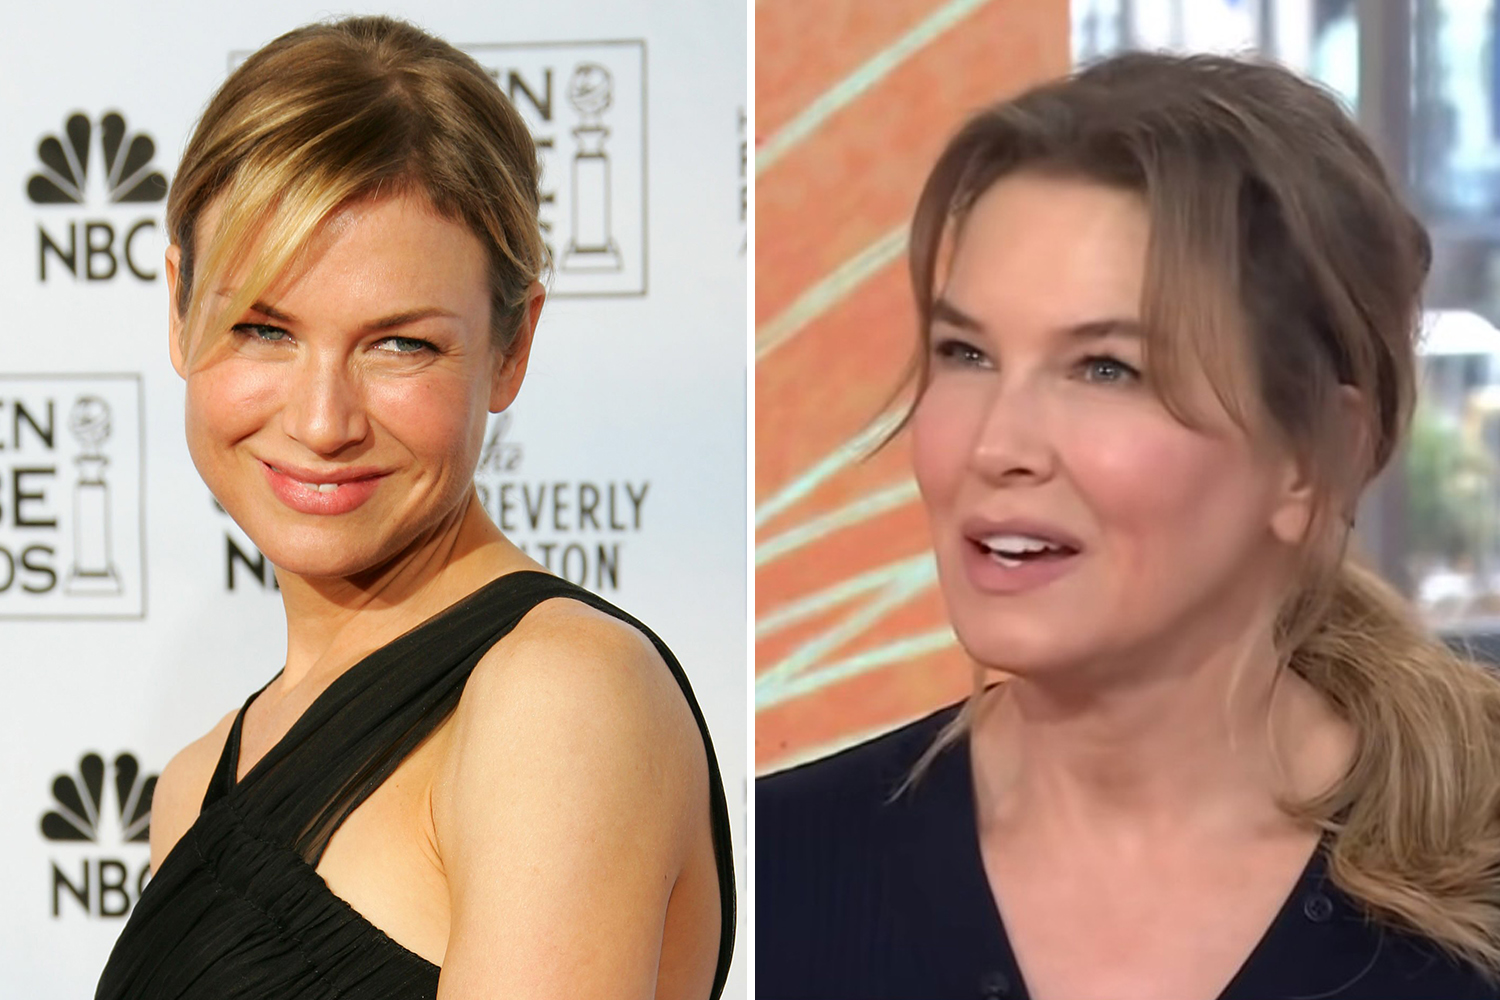 We Can't Believe It's Her! Renée Zellweger's Dramatic Transformation for New Film 'Pam' Revealed